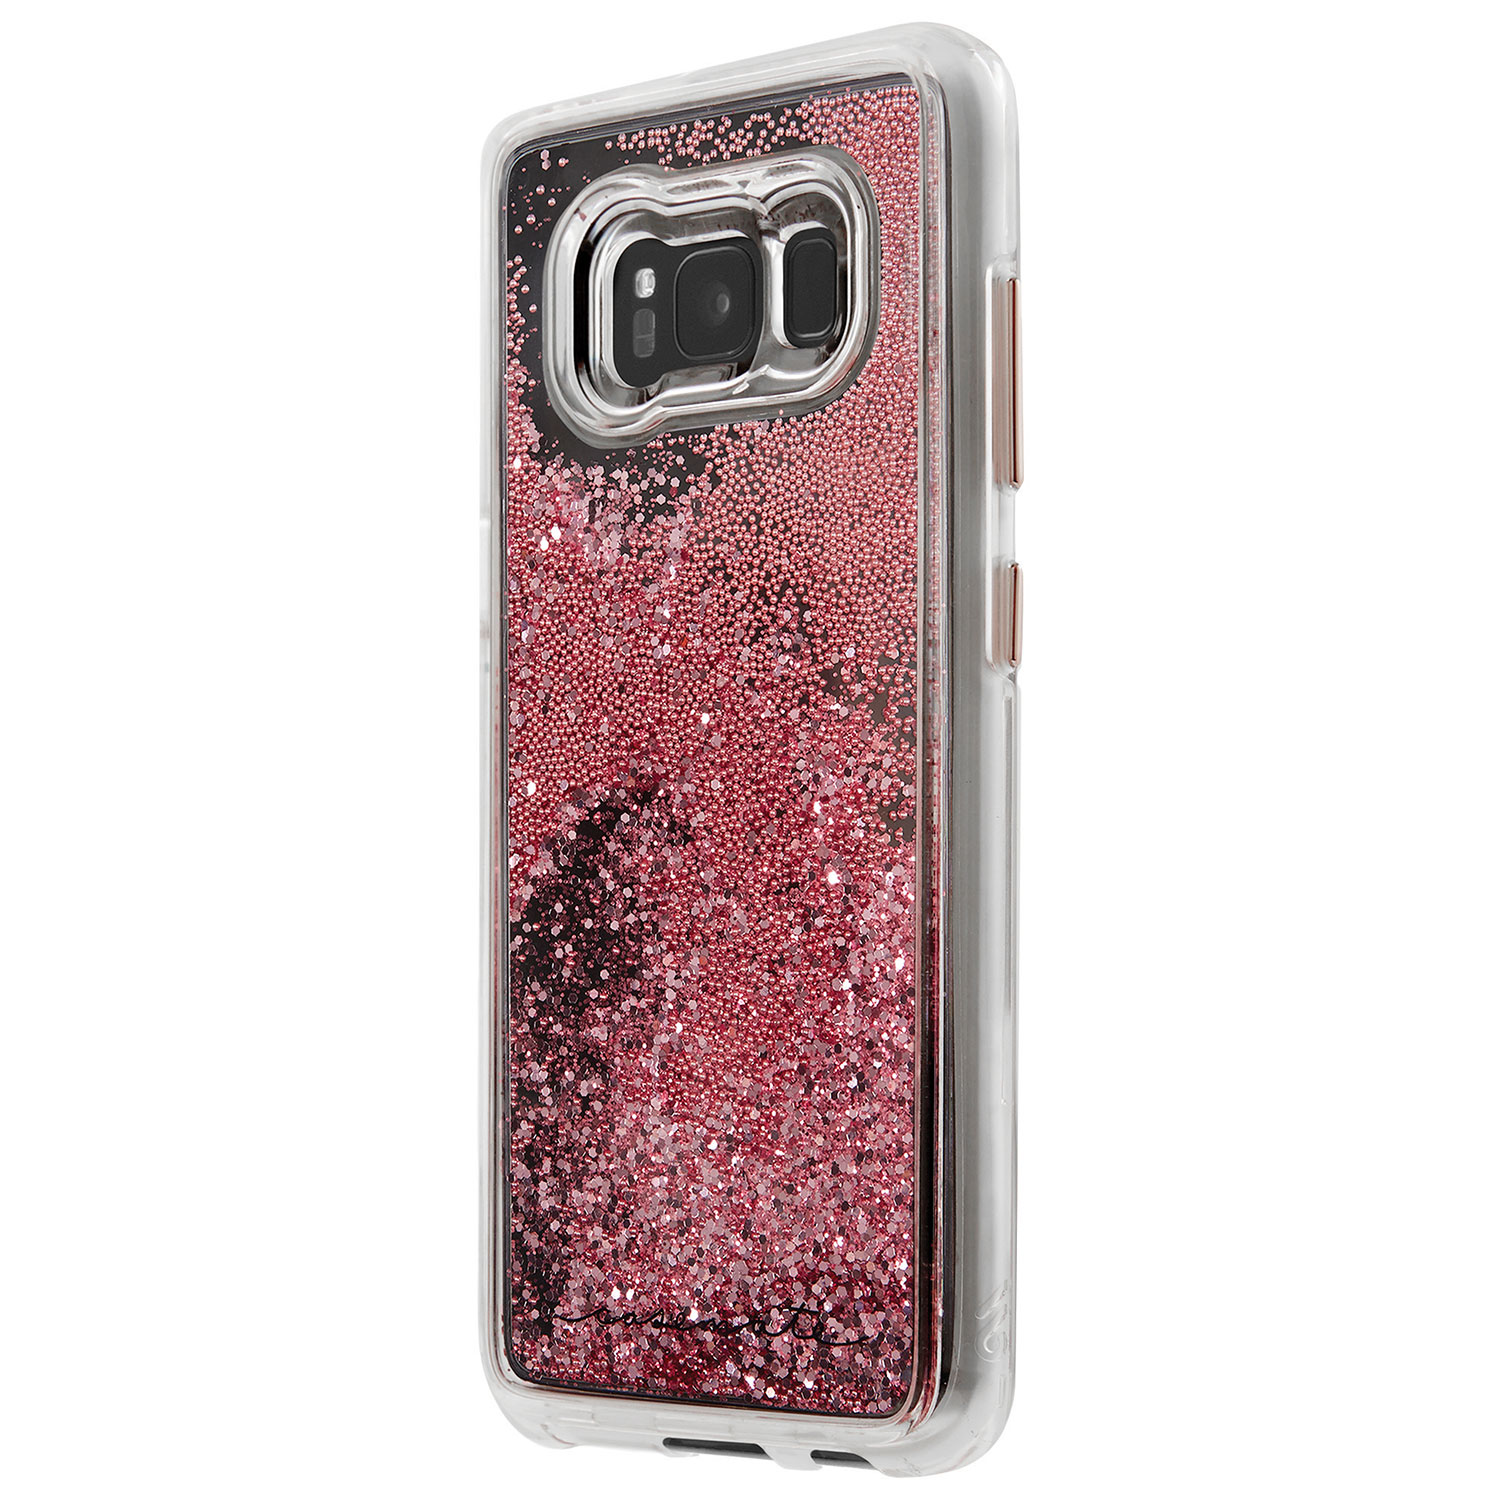 Case-Mate Naked Tough Waterfall Fitted Soft Shell Case for Galaxy S8 Plus - Rose Gold